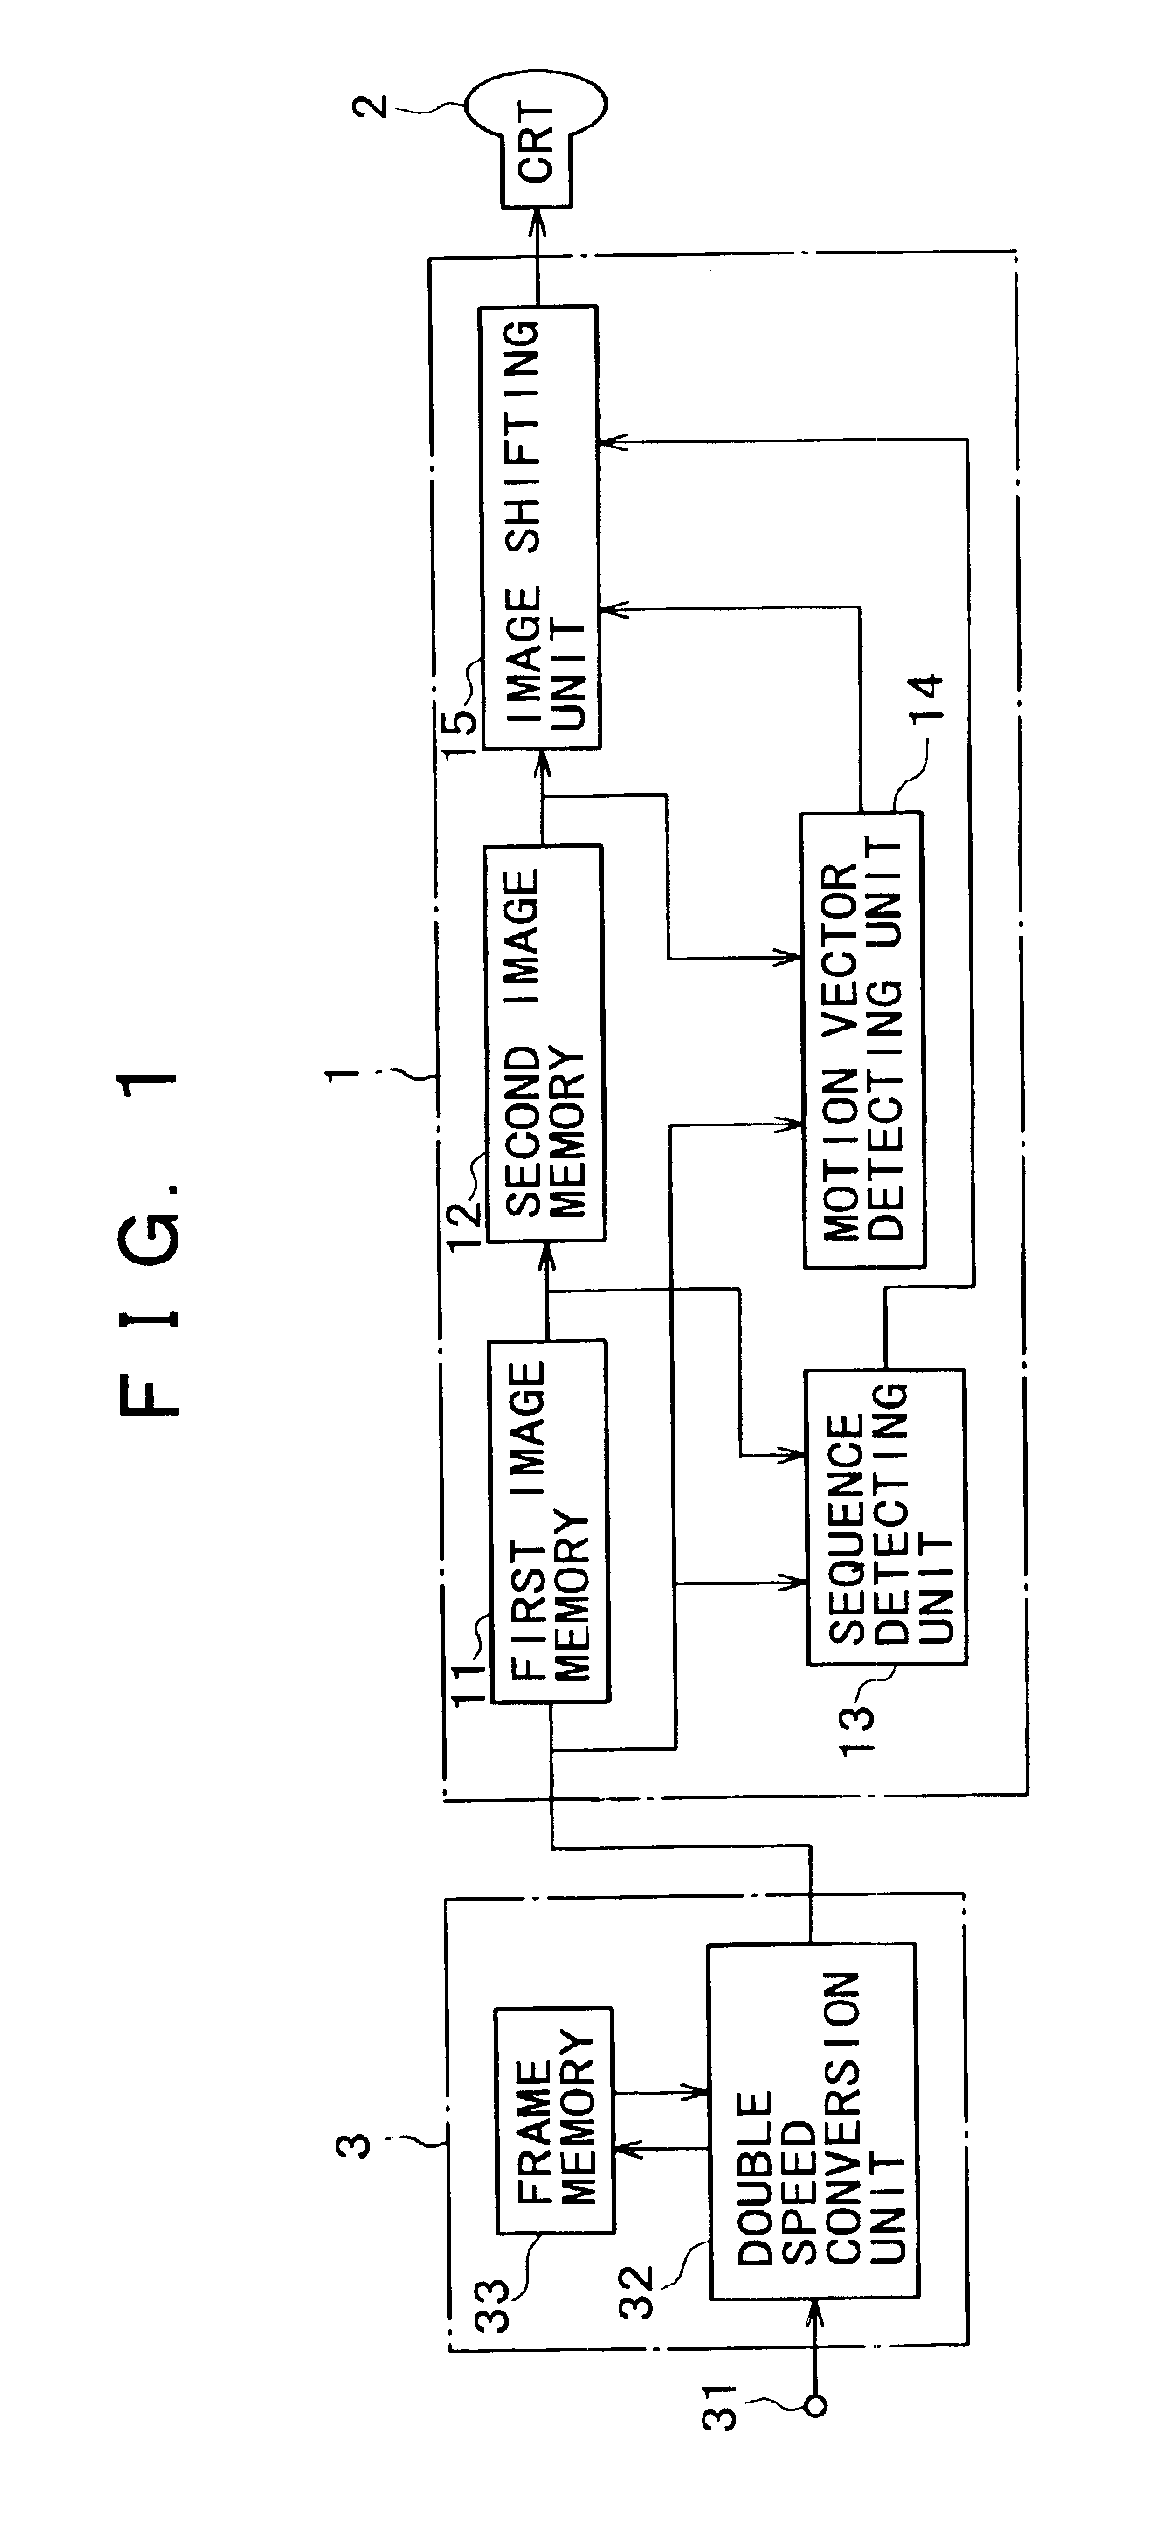 Image signal processing apparatus and method